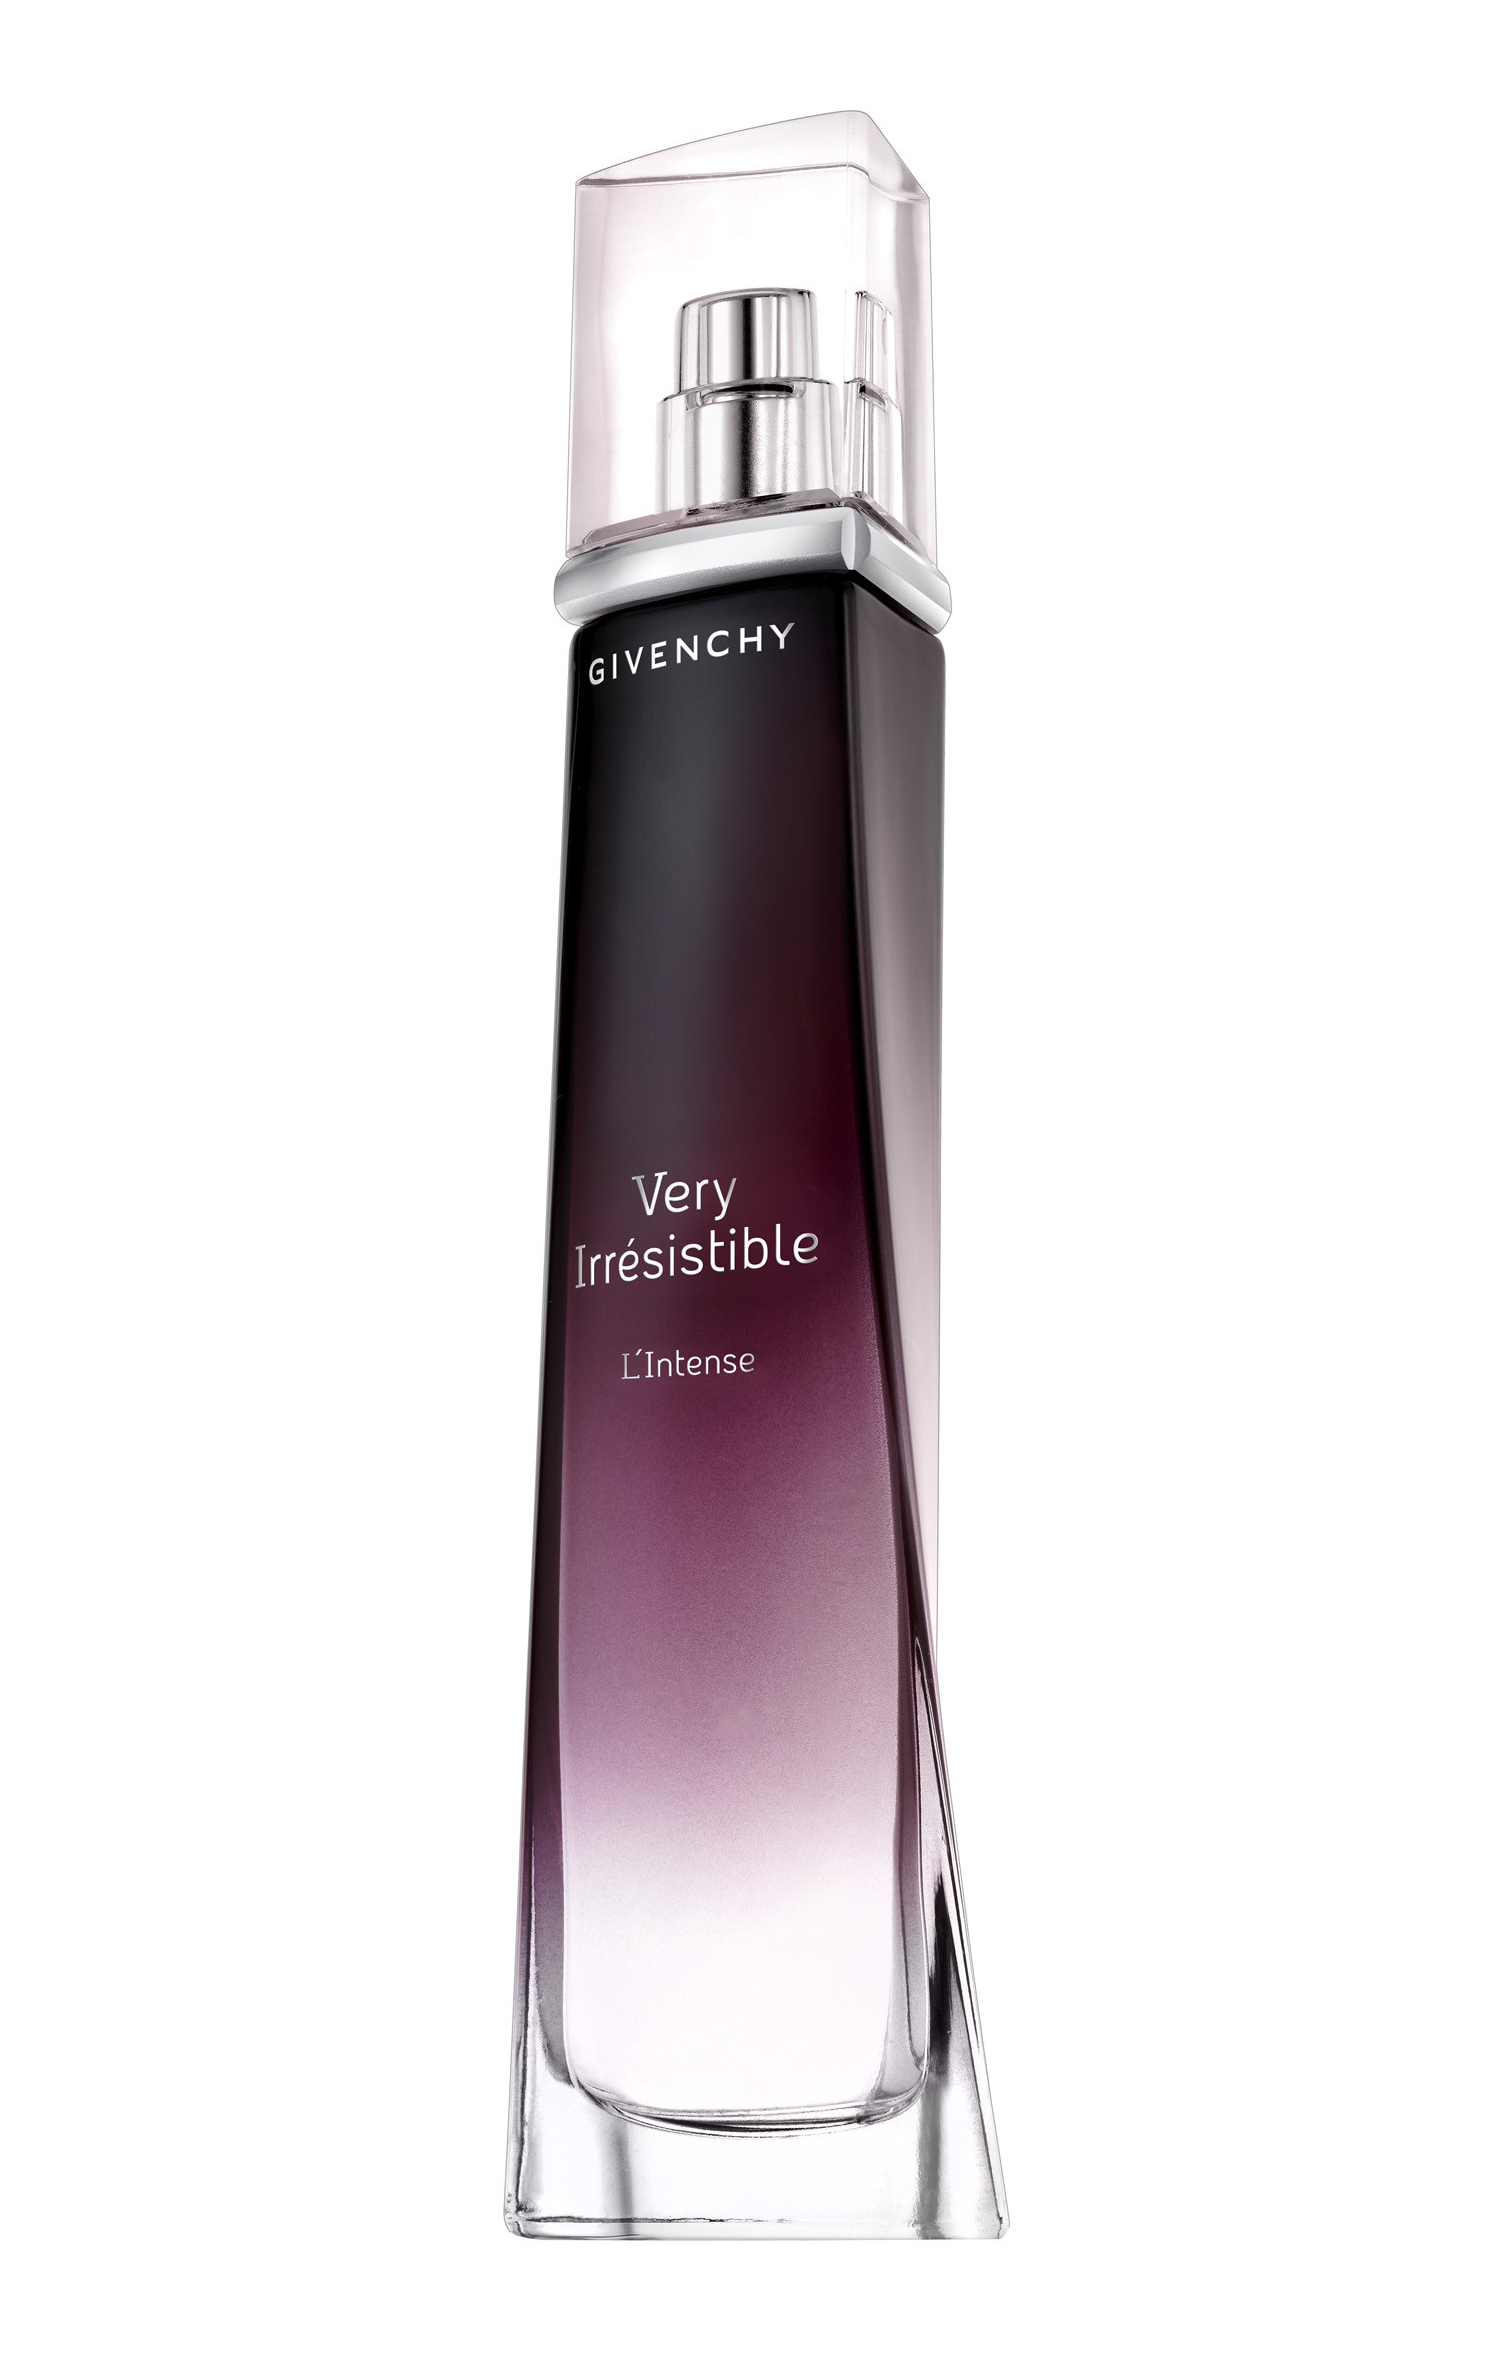 Very Irresistible Givenchy L’Intense Givenchy perfume - a fragrance for